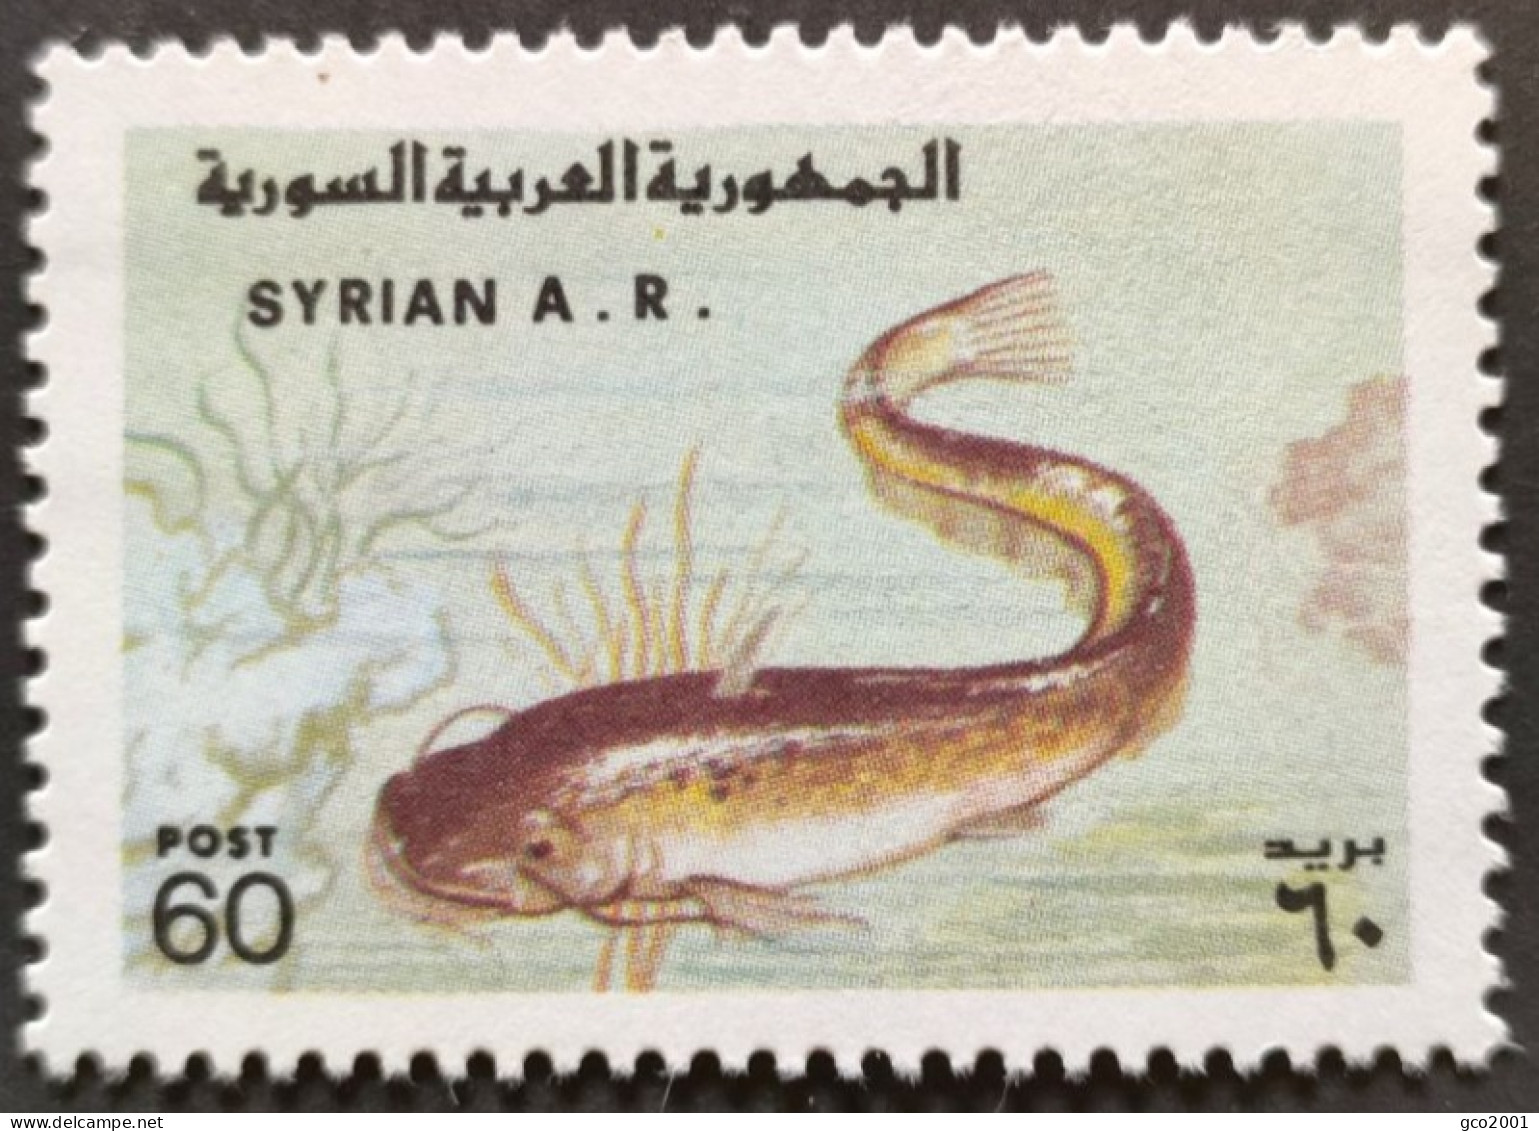 SYRIE / YT 524 / FAUNE - POISSON CHAT / NEUF ** / MNH - Poissons